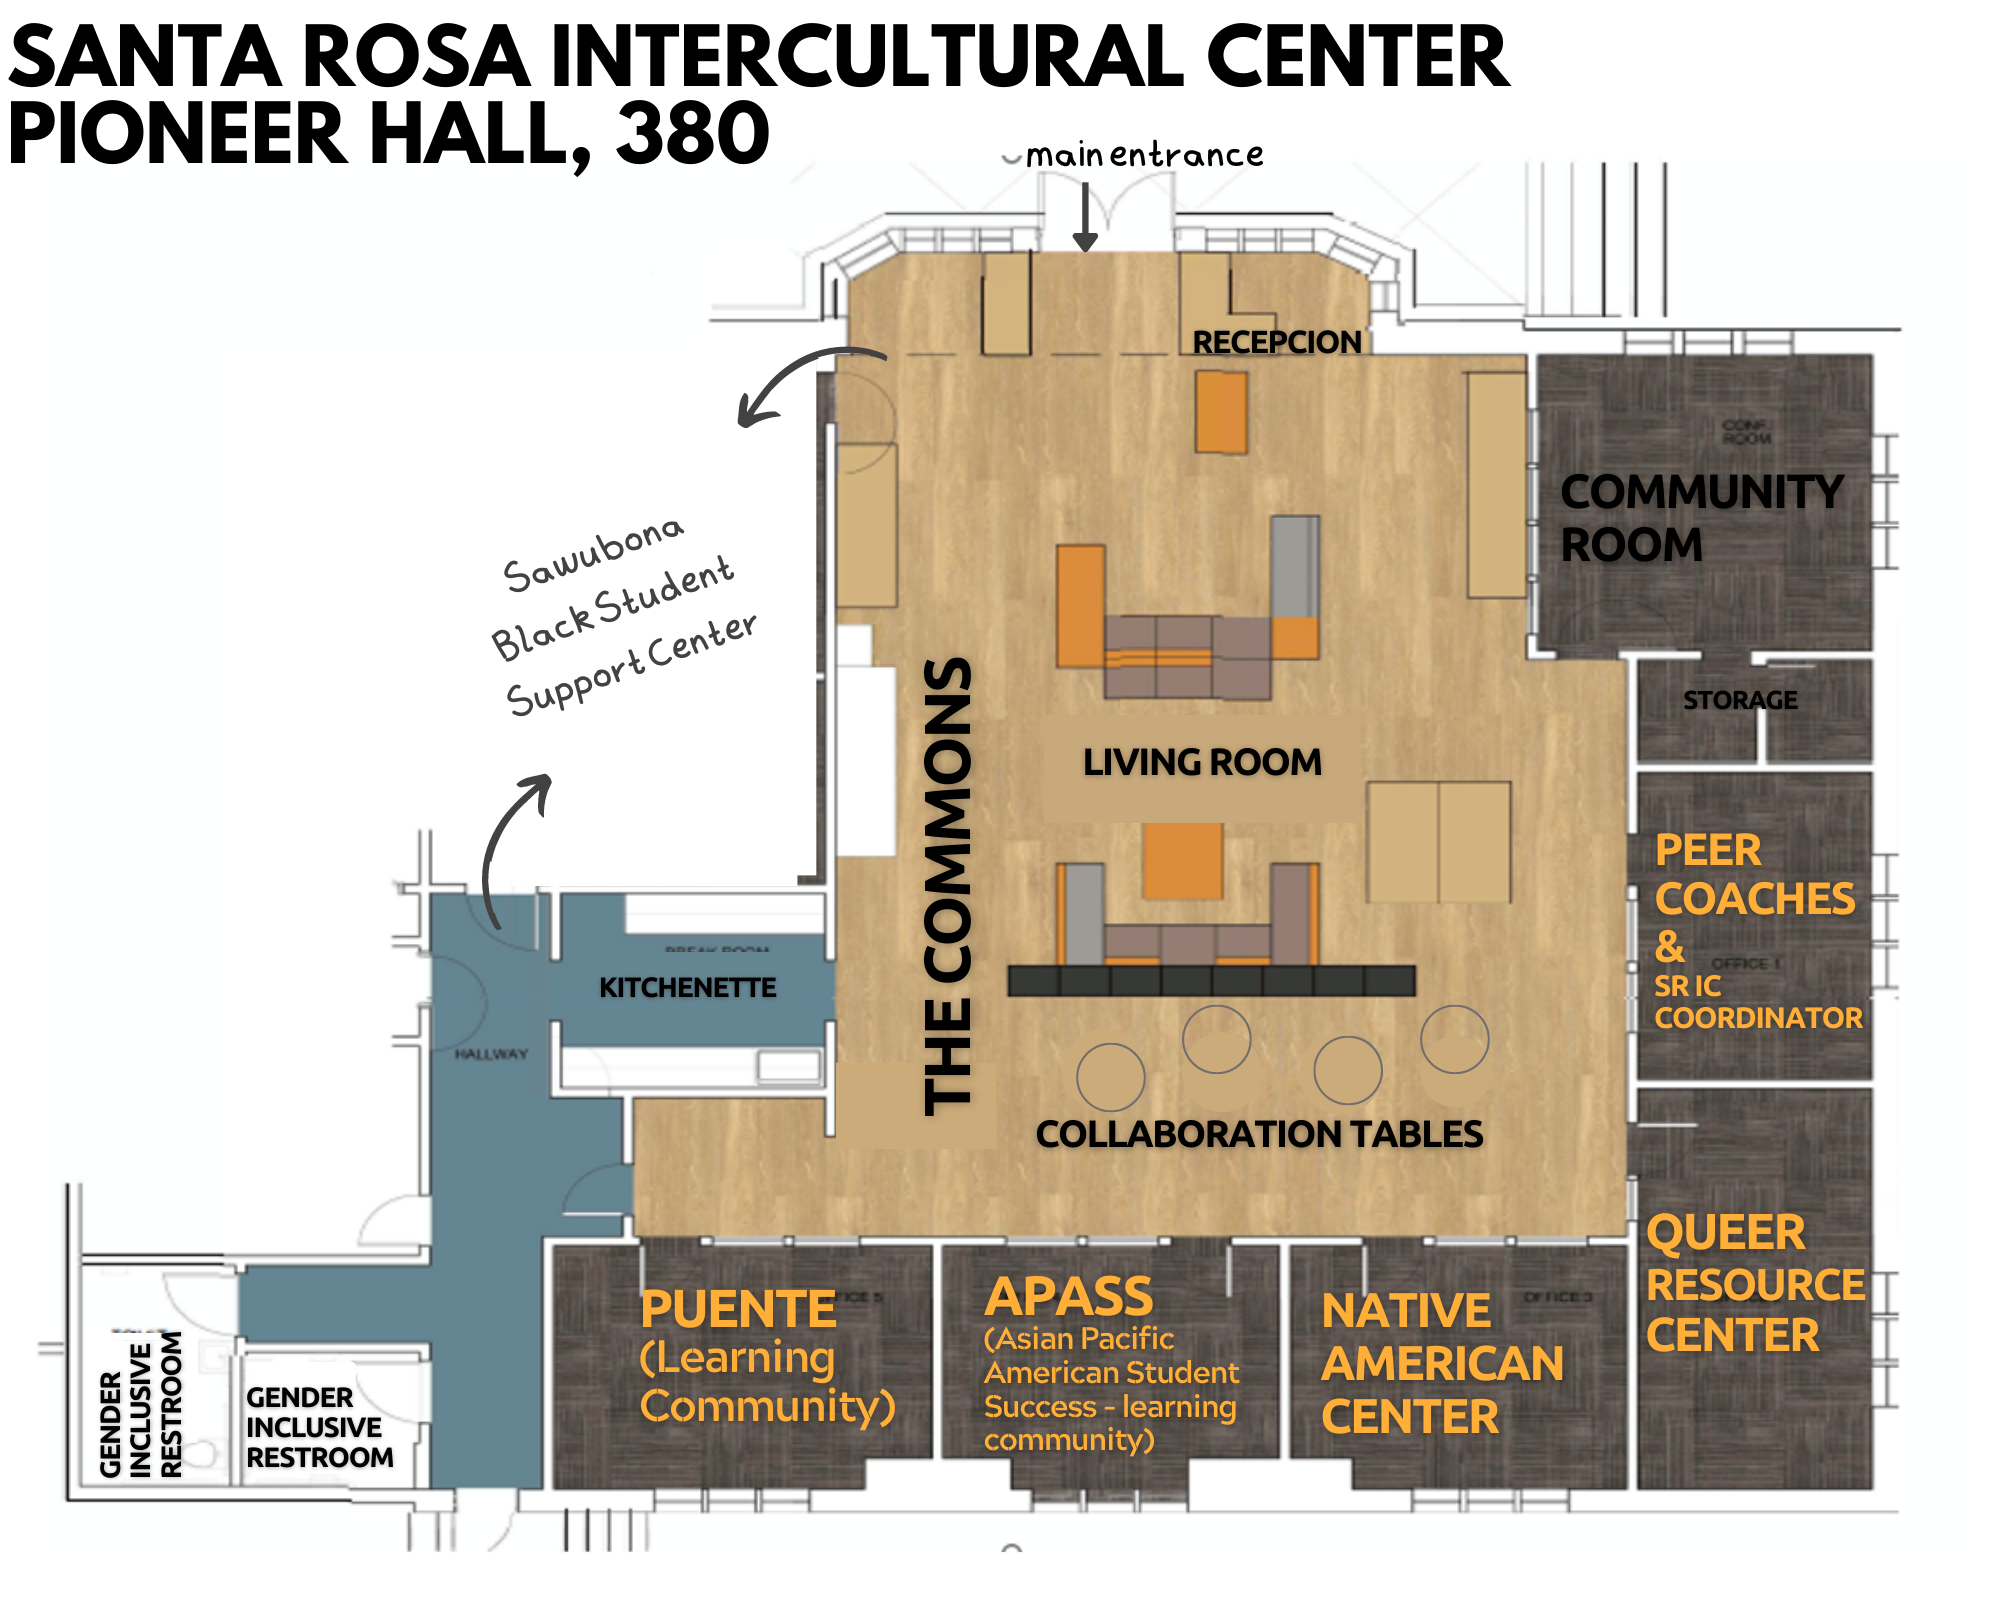 Map of inside the SR IC. All information provided about the centers, offices, and spaces on the image are written below